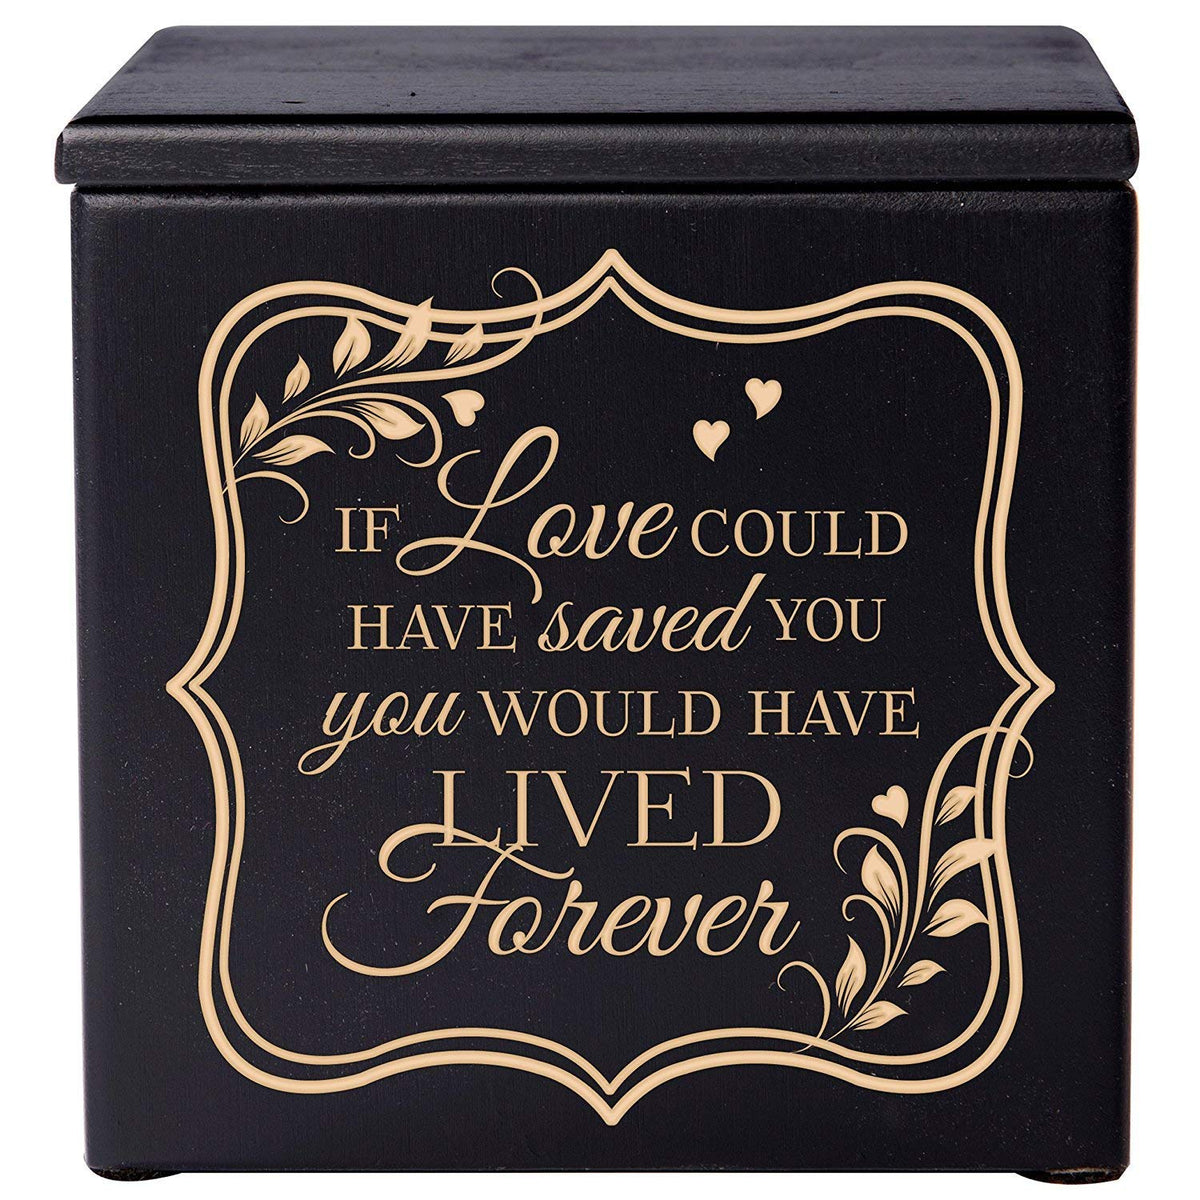 human urn ashes memorial funeral adult child black